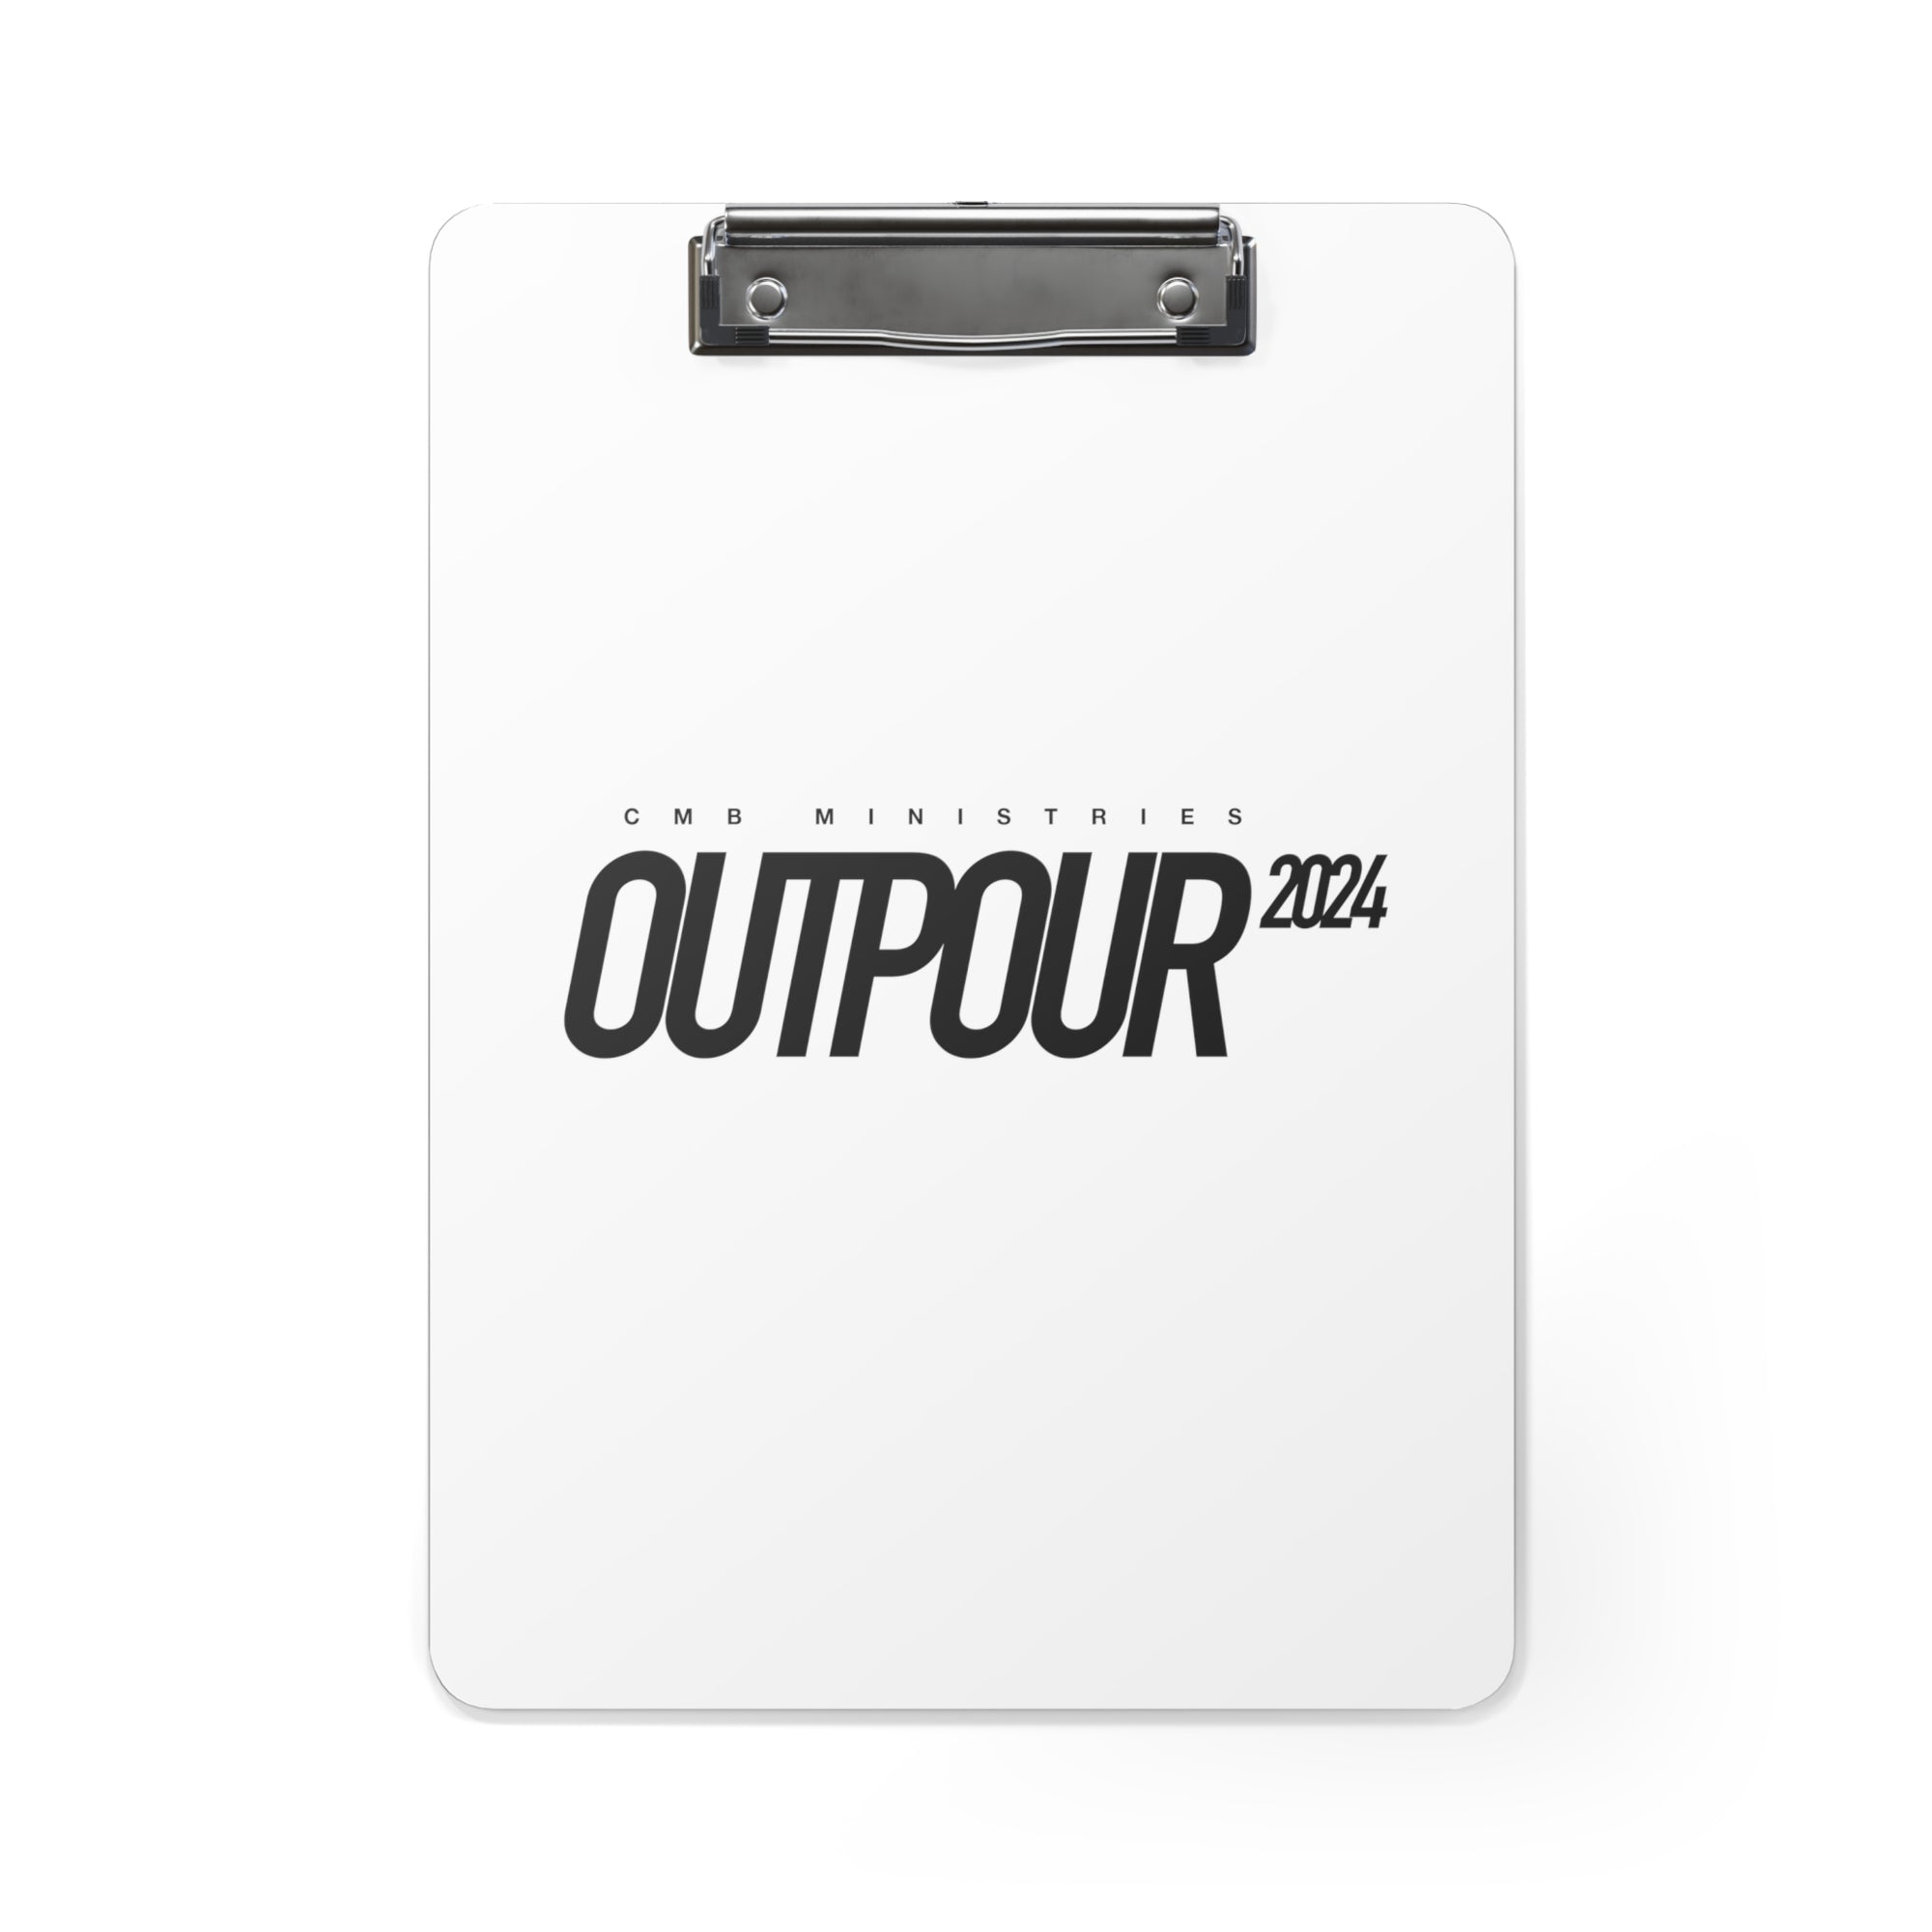 Outpour 2024 - Clipboard